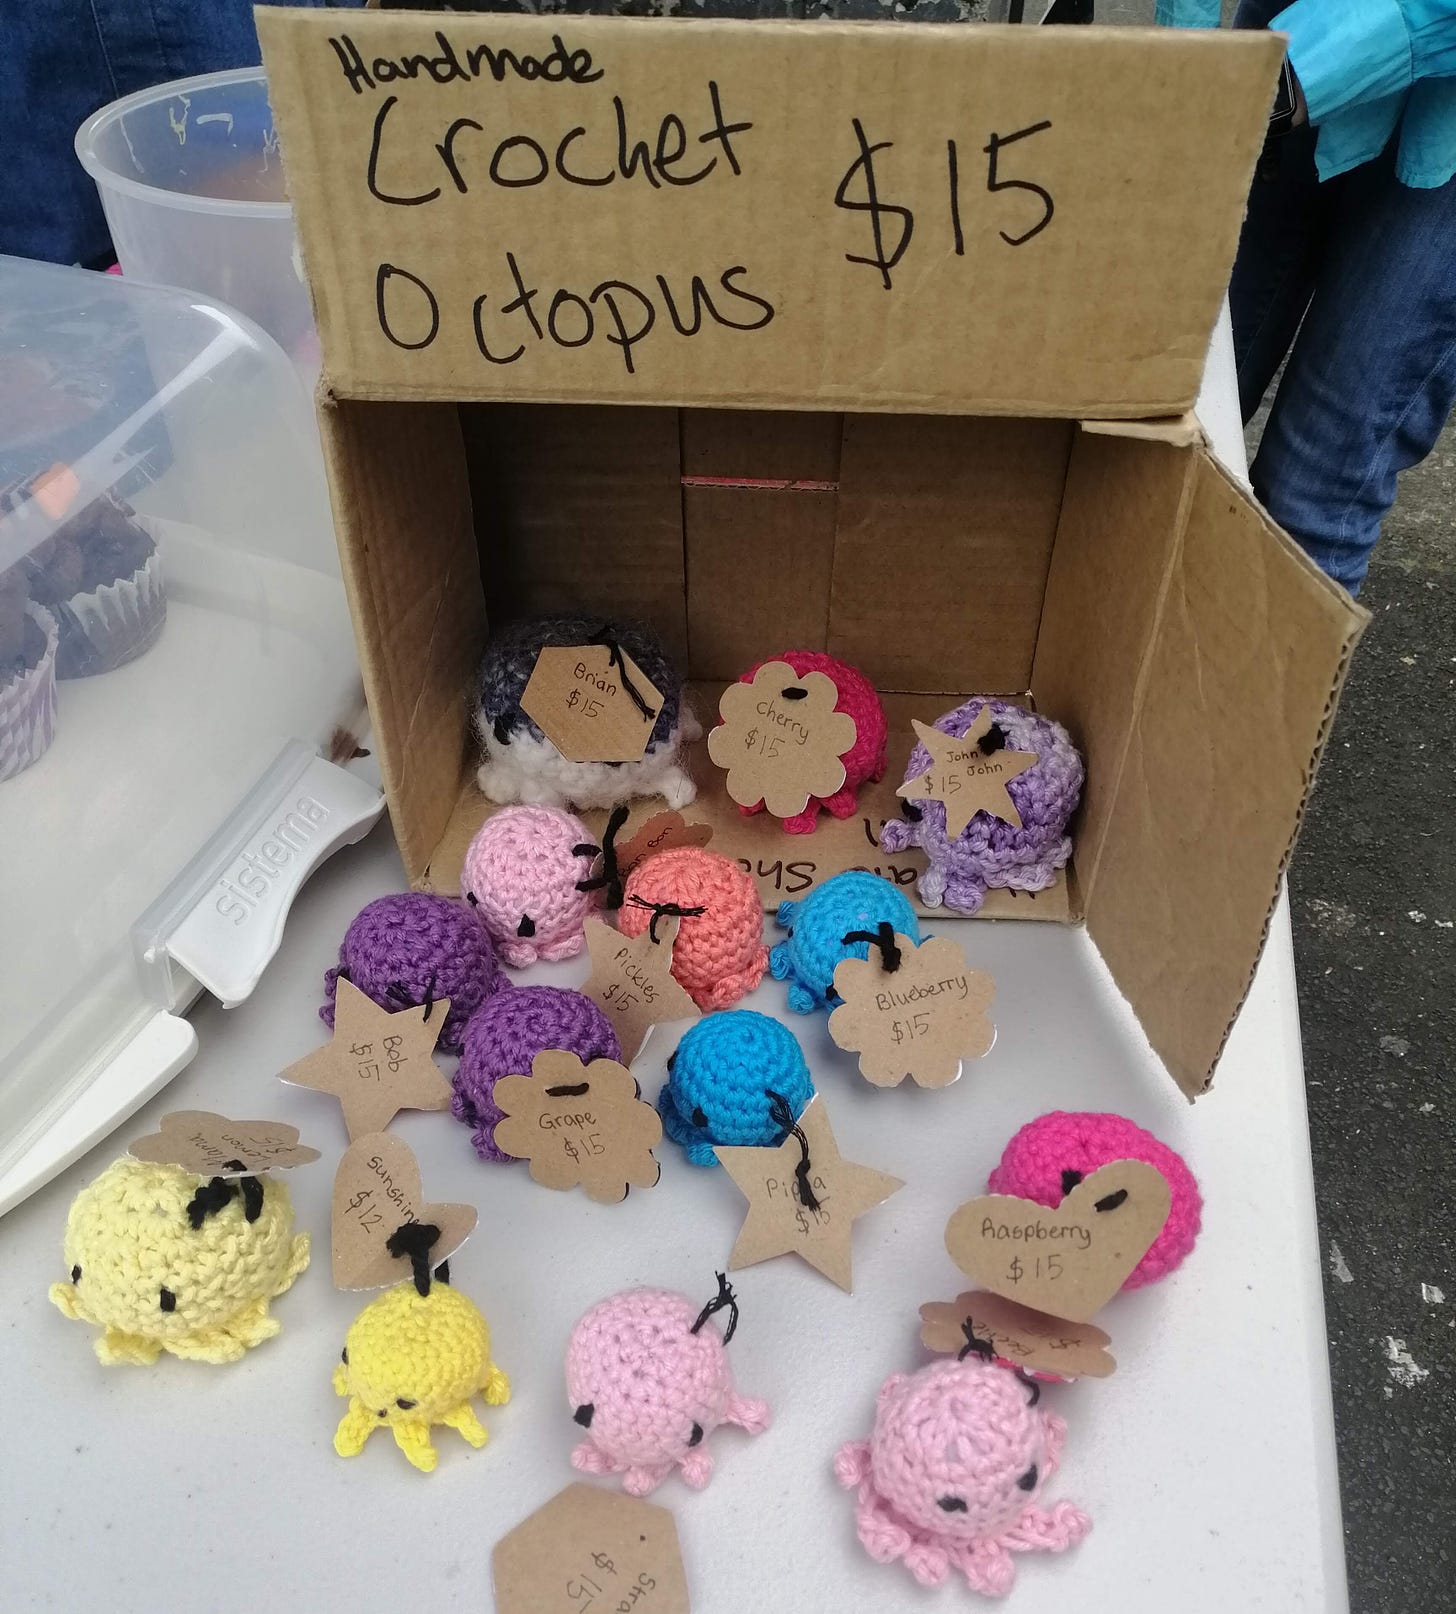 A box with a sign that says "handmade crochet octopus $15" and a consortium of crochet octopi on the table beside cupcakes for sale. 